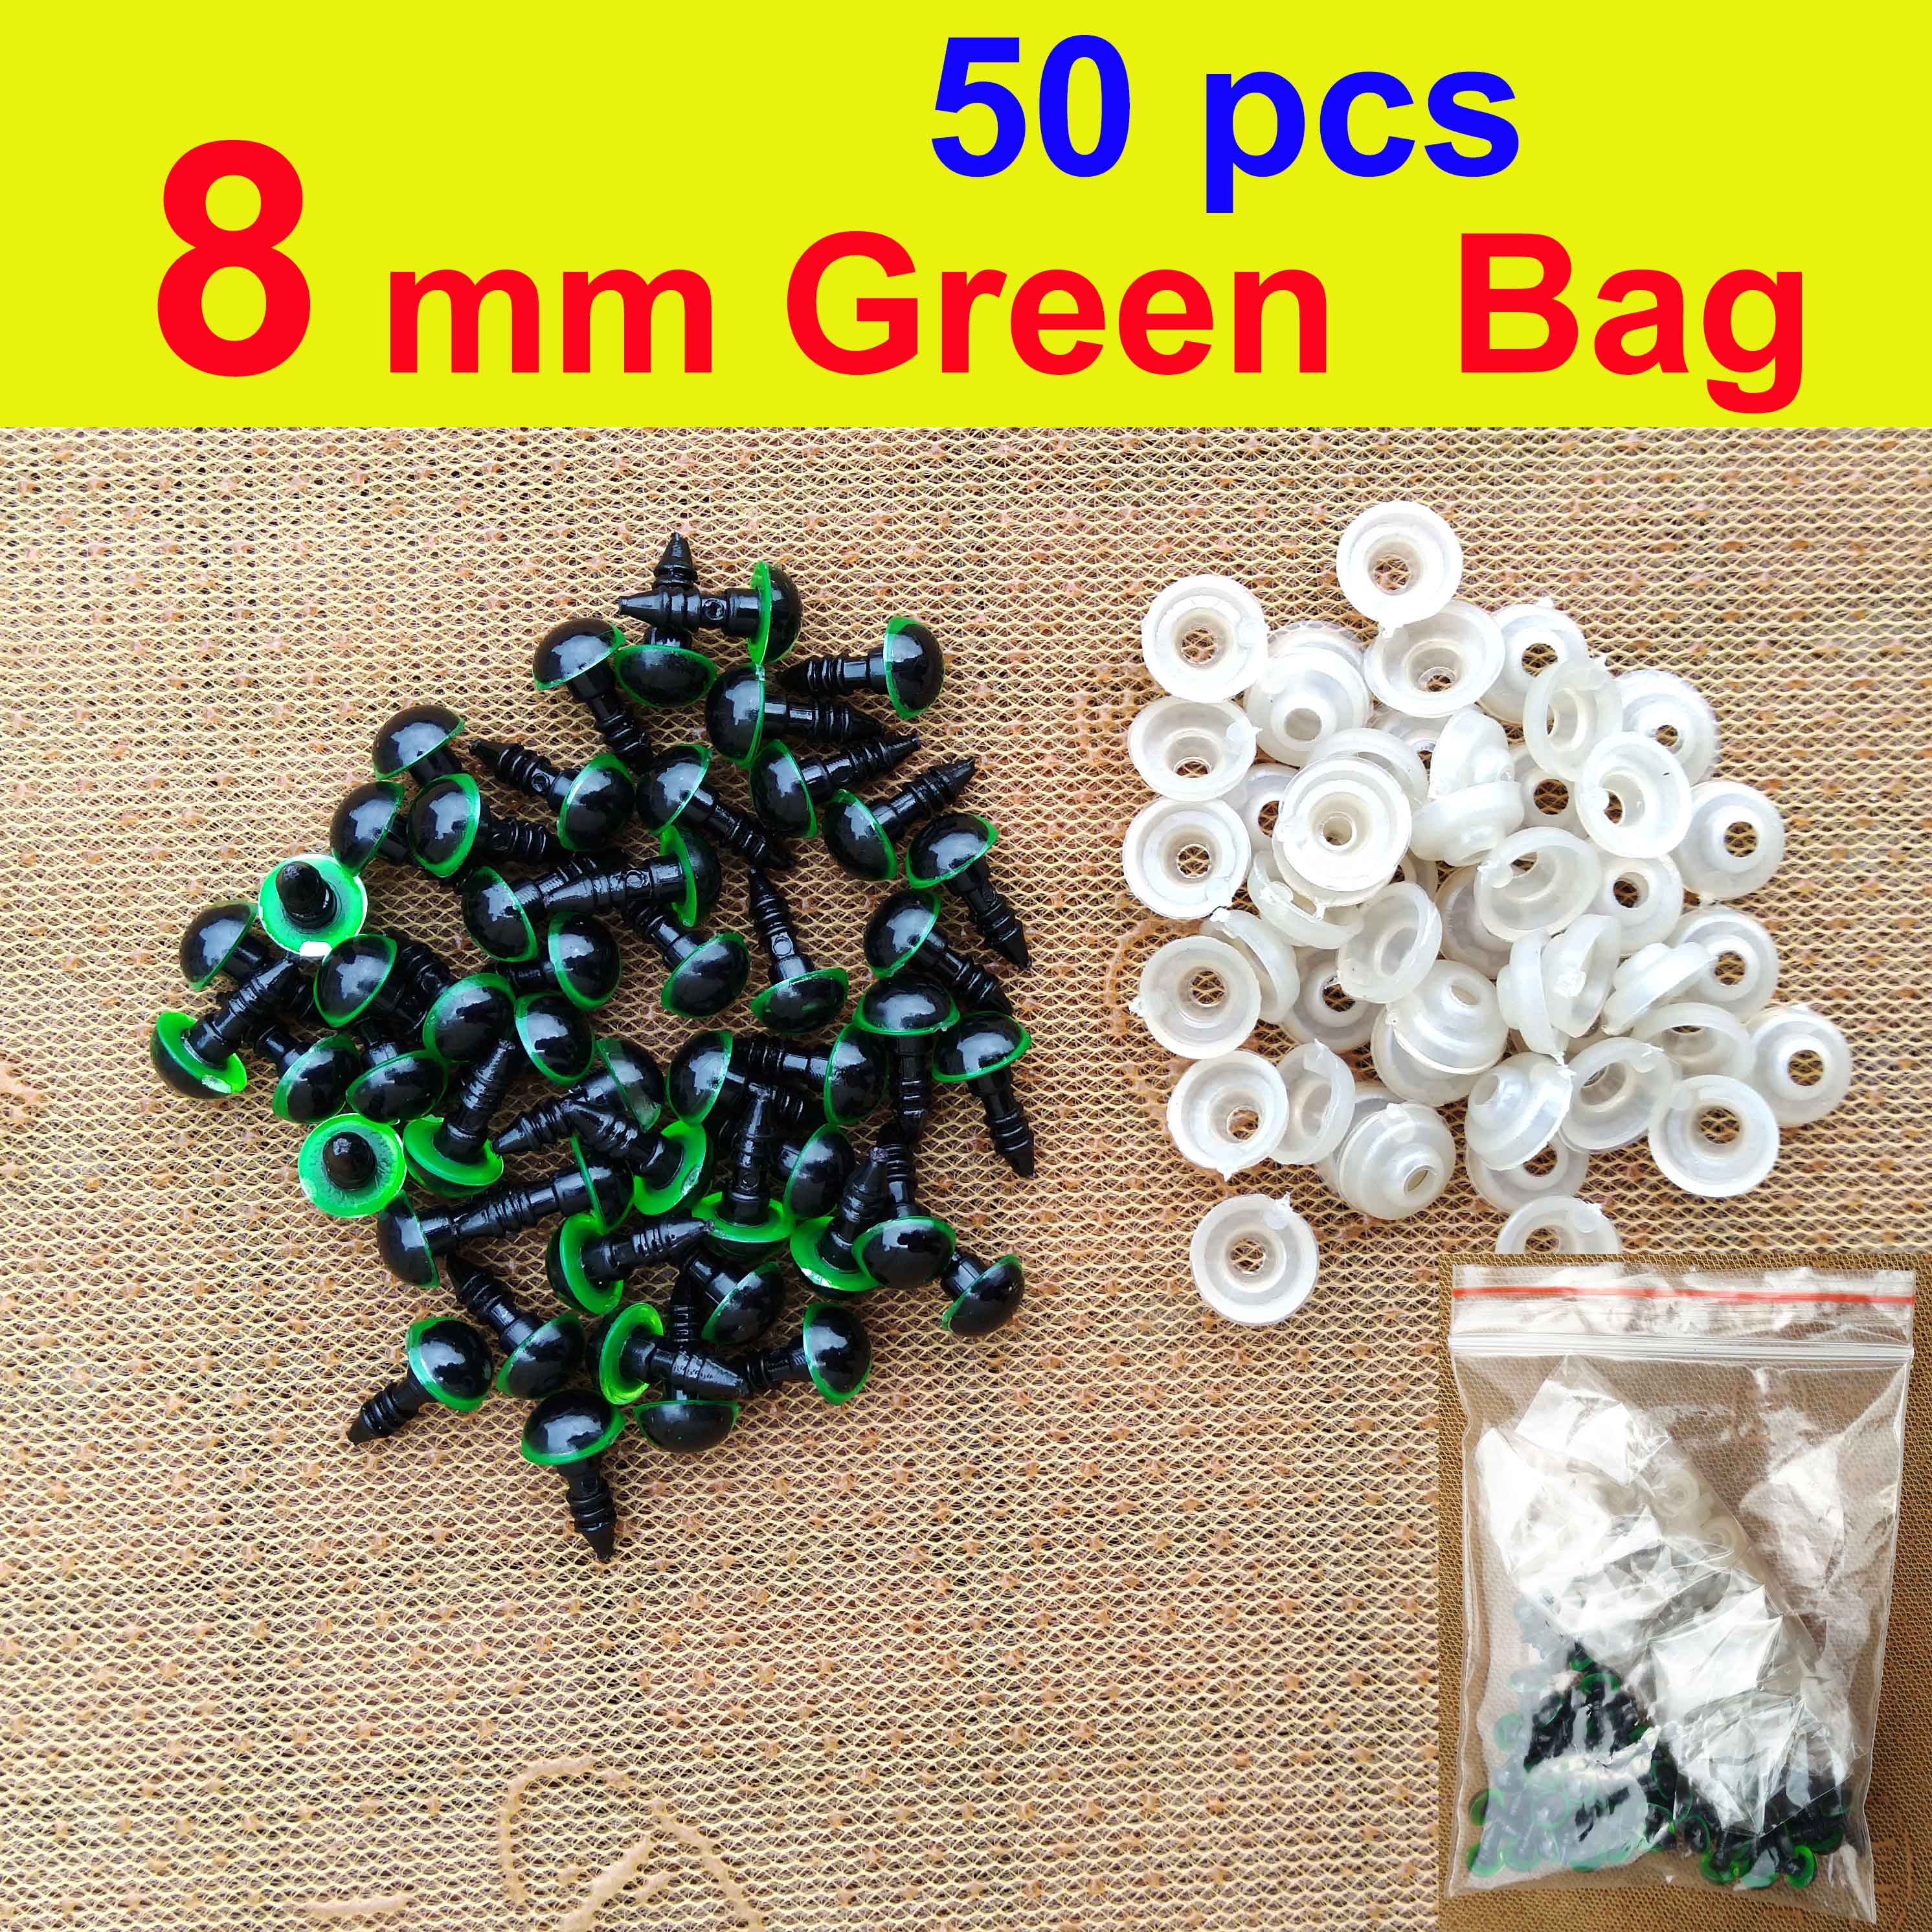 16mm Safety Plastic Colorful Doll Eyes for Crochet Stuffed Animals & D